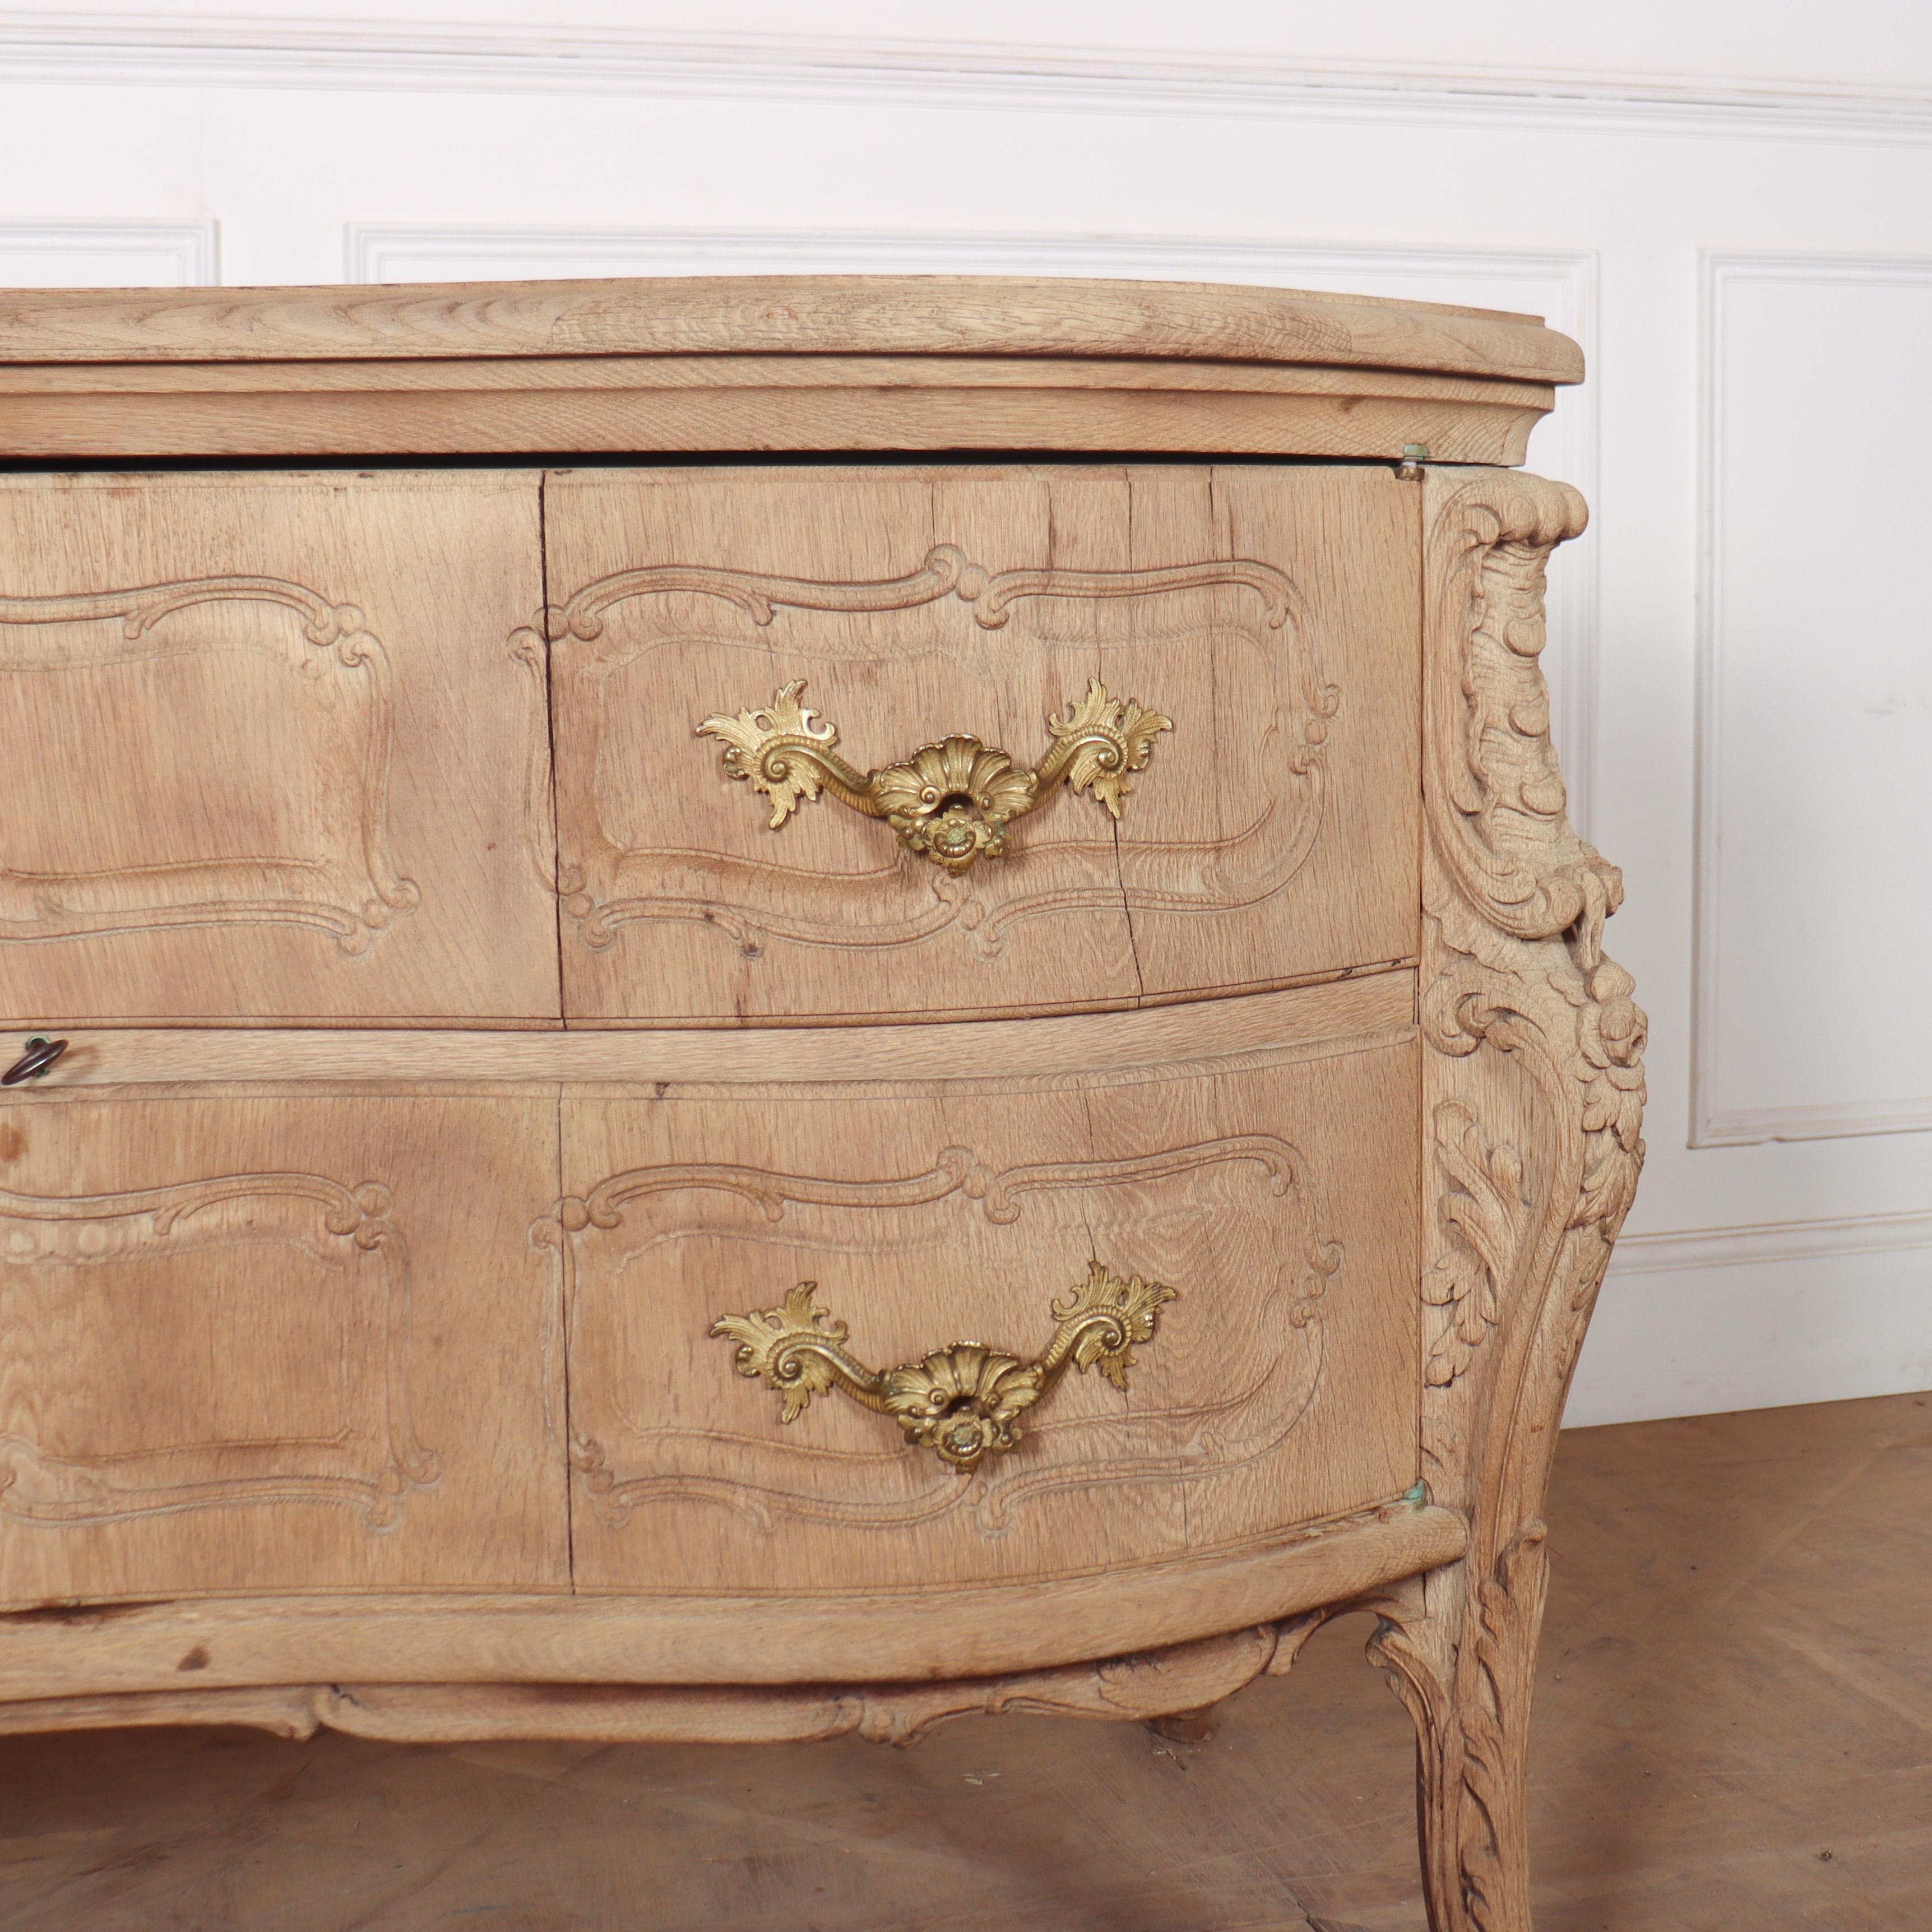 French Bleached Oak Sideboard In Good Condition For Sale In Leamington Spa, Warwickshire